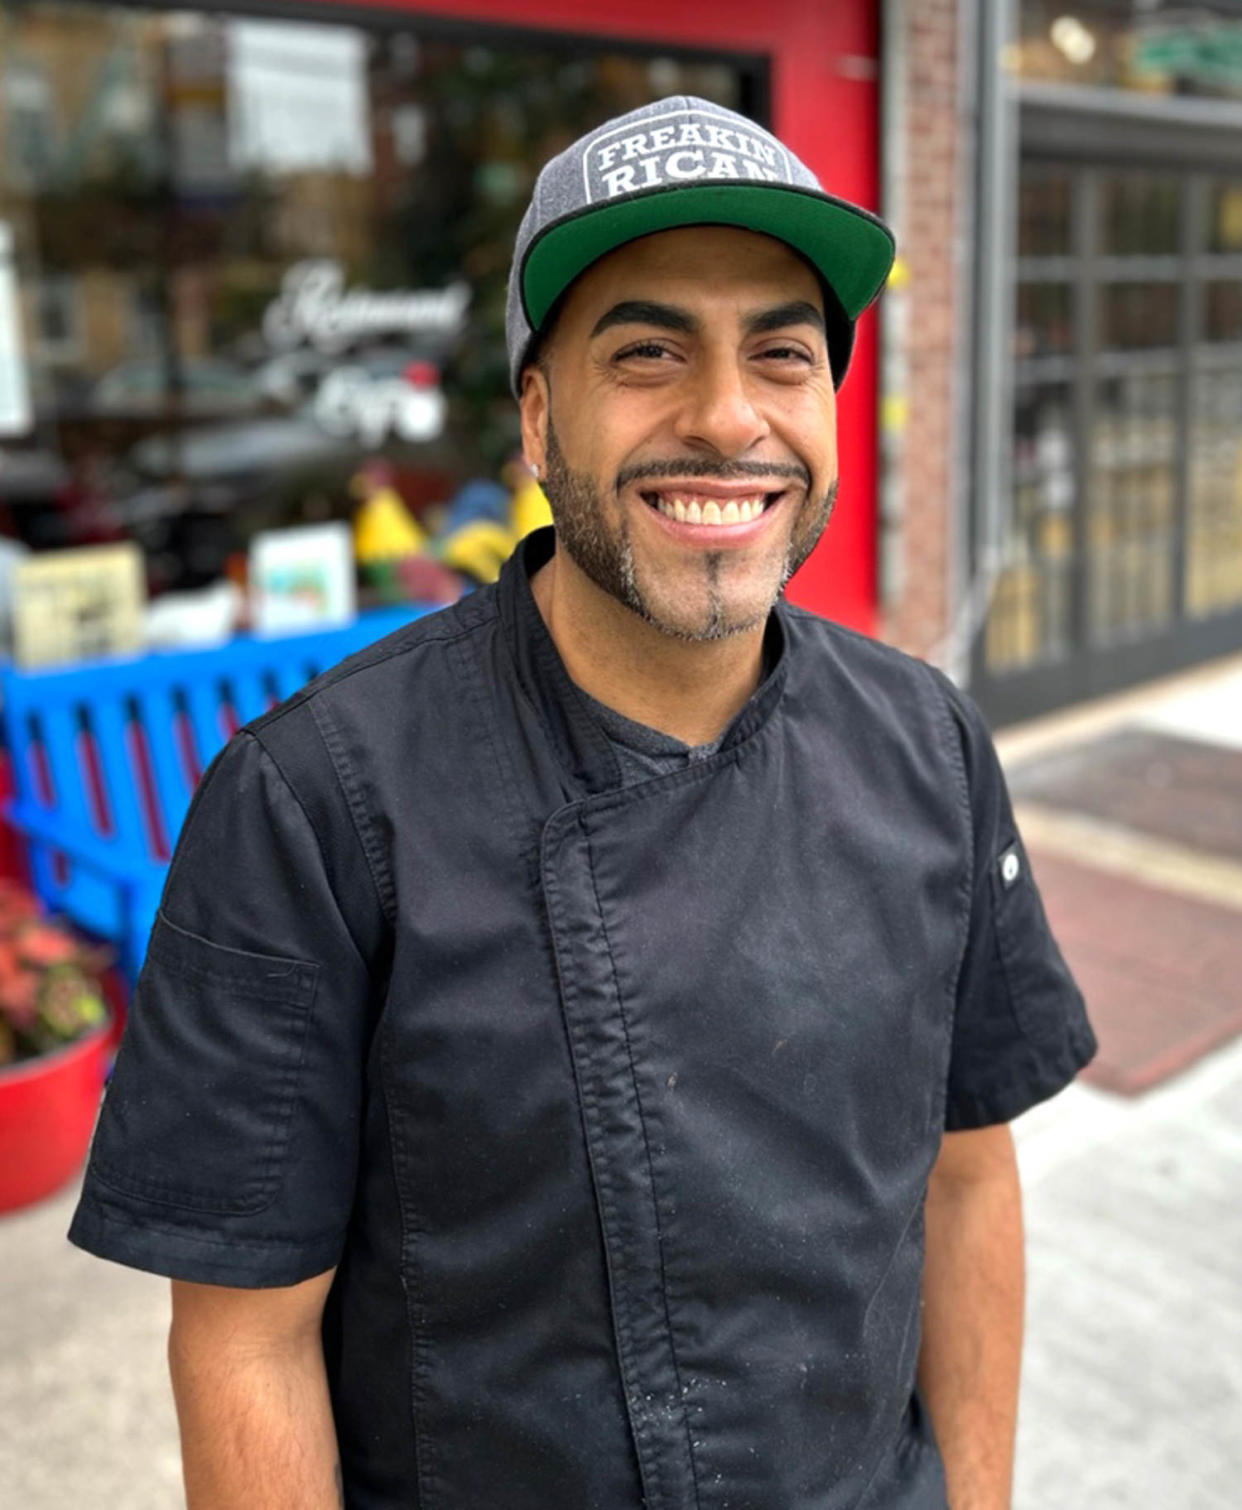 Image: Derick Lopez, chef and owner of The Freakin Rican in Queens, N.Y. (Courtesy Raul Reyes)